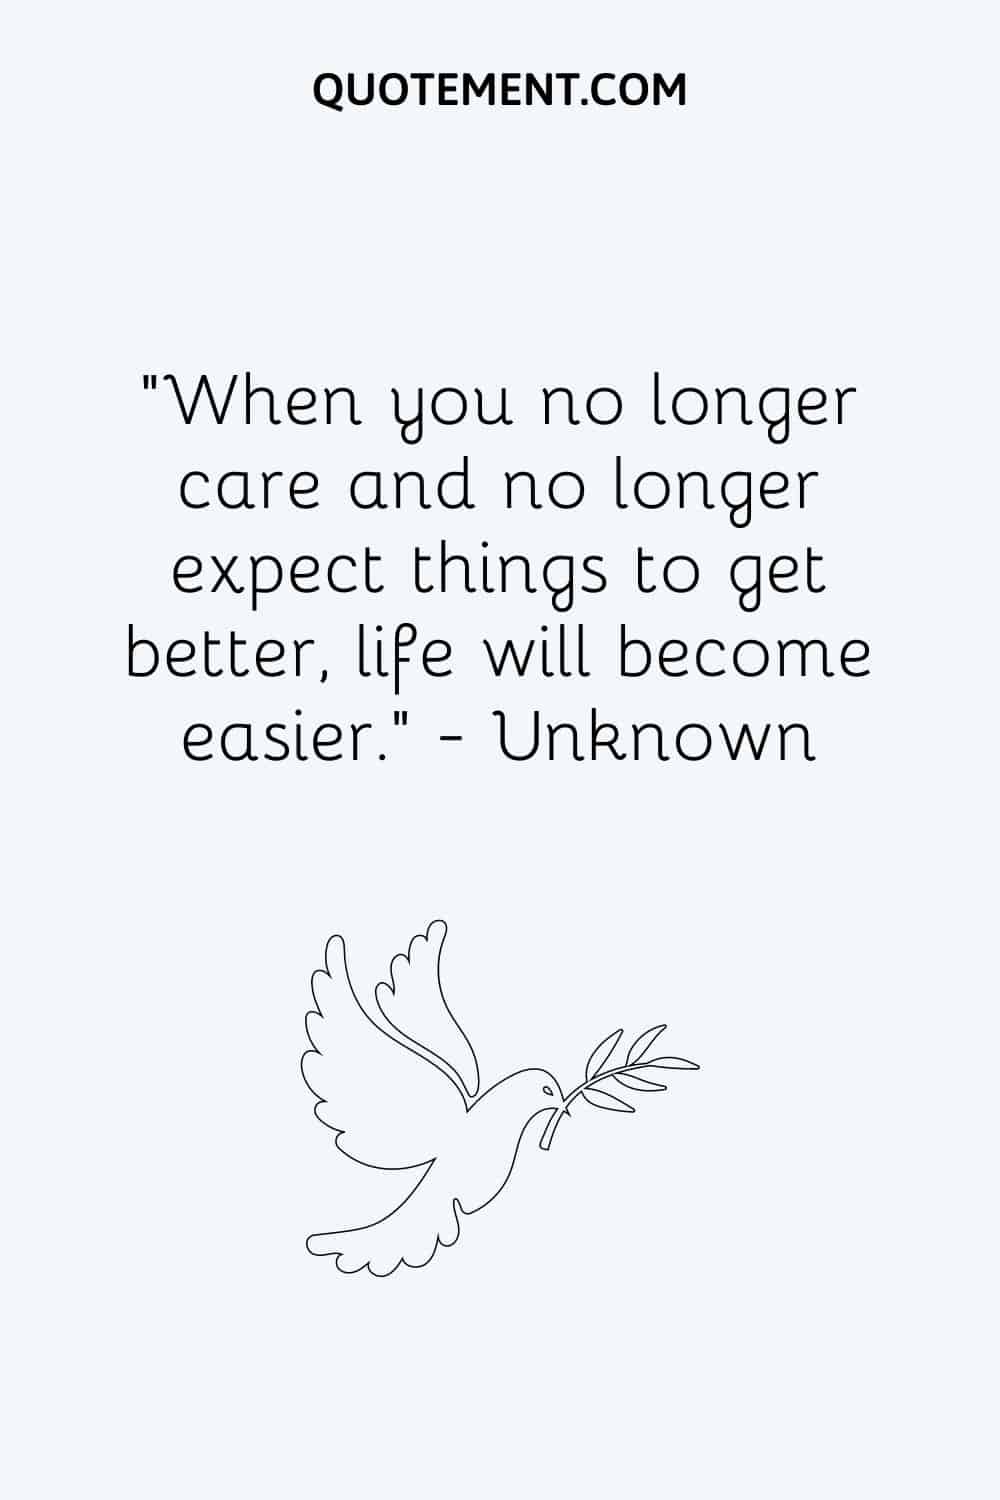 When you no longer care and no longer expect things to get better, life will become easier